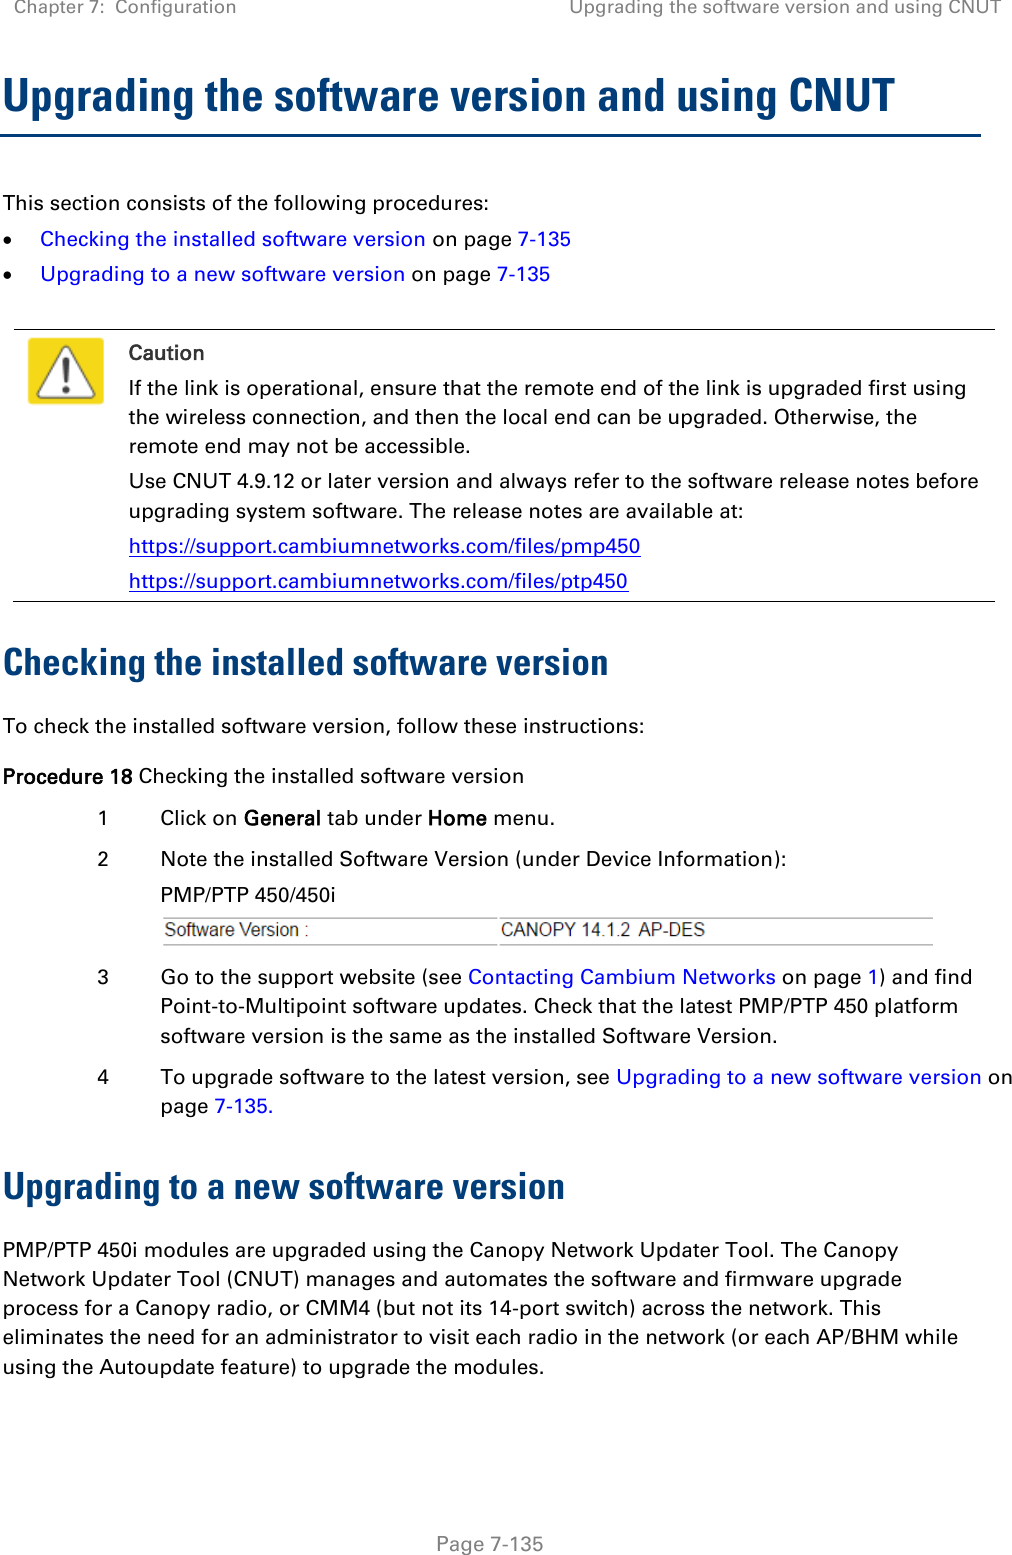 Chapter 7:  Configuration Upgrading the software version and using CNUT   Page 7-135 Upgrading the software version and using CNUT This section consists of the following procedures:  Checking the installed software version on page 7-135  Upgrading to a new software version on page 7-135   Caution If the link is operational, ensure that the remote end of the link is upgraded first using the wireless connection, and then the local end can be upgraded. Otherwise, the remote end may not be accessible. Use CNUT 4.9.12 or later version and always refer to the software release notes before upgrading system software. The release notes are available at: https://support.cambiumnetworks.com/files/pmp450 https://support.cambiumnetworks.com/files/ptp450 Checking the installed software version To check the installed software version, follow these instructions: Procedure 18 Checking the installed software version 1 Click on General tab under Home menu. 2 Note the installed Software Version (under Device Information): PMP/PTP 450/450i   3 Go to the support website (see Contacting Cambium Networks on page 1) and find Point-to-Multipoint software updates. Check that the latest PMP/PTP 450 platform software version is the same as the installed Software Version. 4 To upgrade software to the latest version, see Upgrading to a new software version on page 7-135. Upgrading to a new software version PMP/PTP 450i modules are upgraded using the Canopy Network Updater Tool. The Canopy Network Updater Tool (CNUT) manages and automates the software and firmware upgrade process for a Canopy radio, or CMM4 (but not its 14-port switch) across the network. This eliminates the need for an administrator to visit each radio in the network (or each AP/BHM while using the Autoupdate feature) to upgrade the modules.  